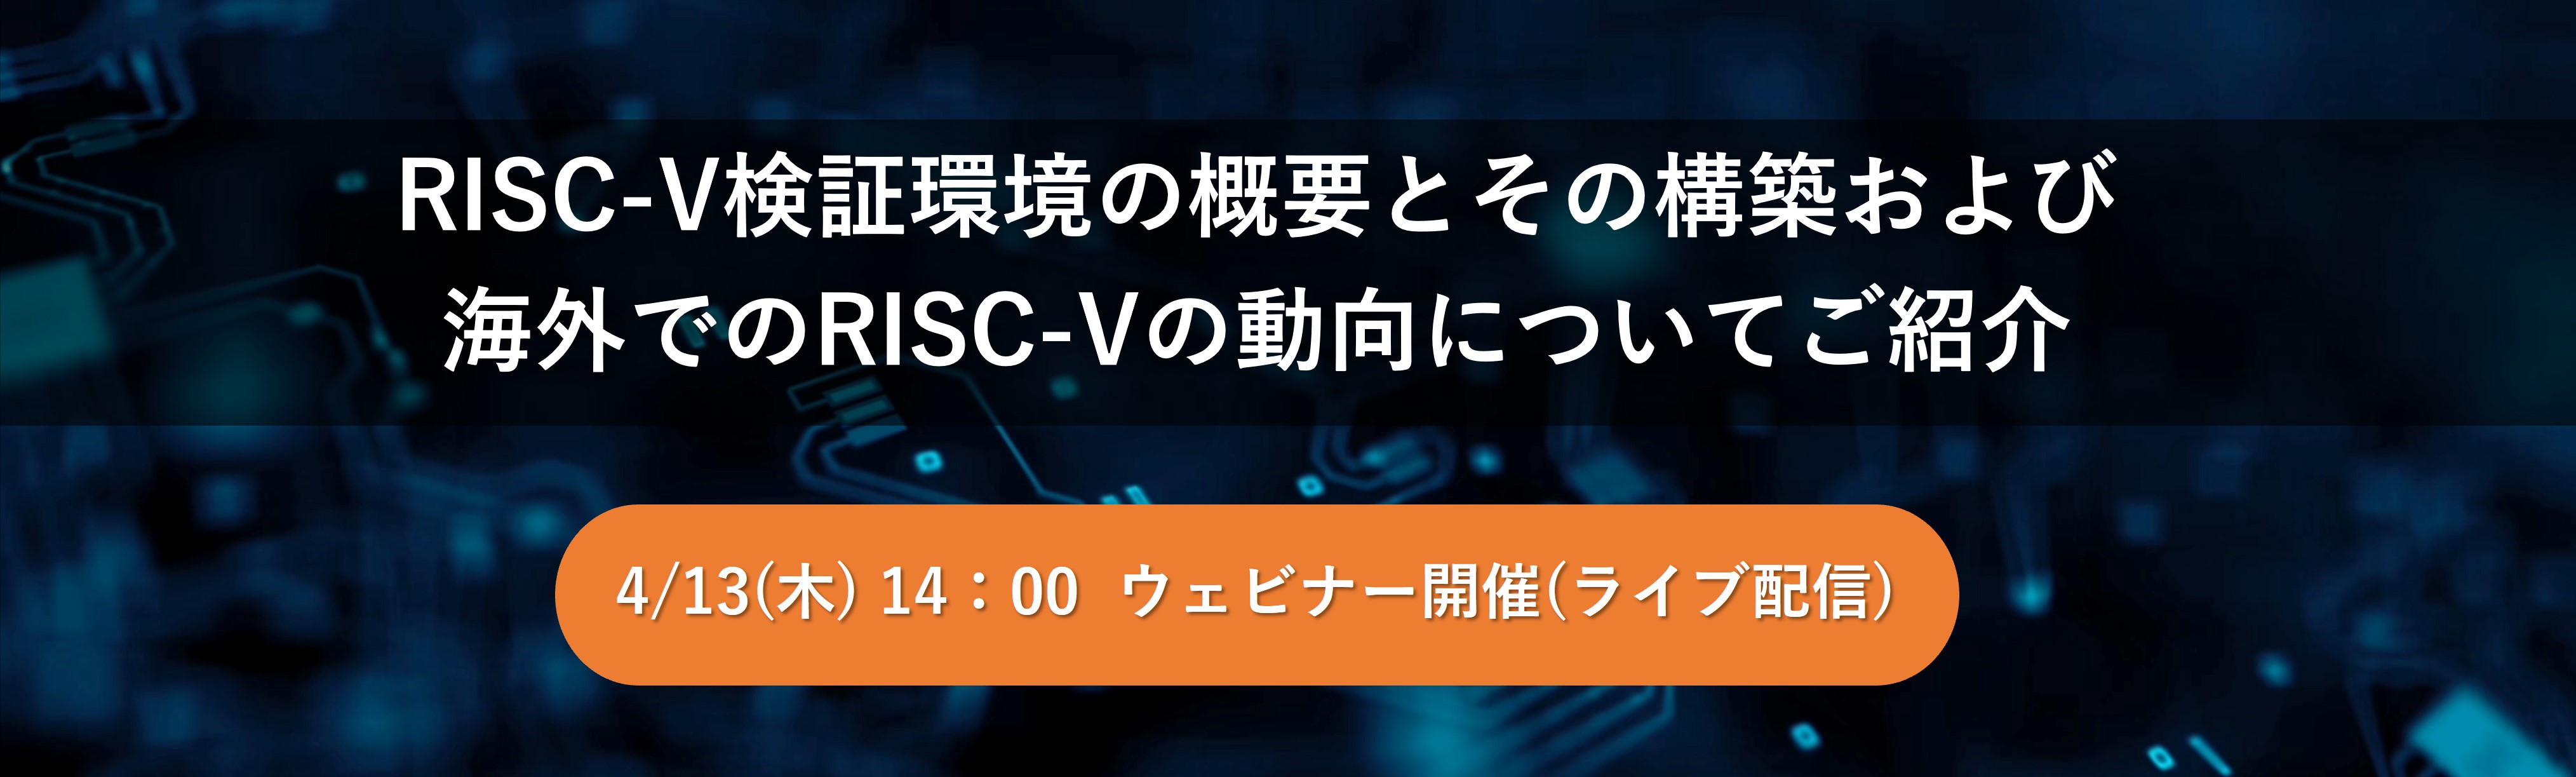 RISC-V Verification Webinar - to be presented in Japanese 